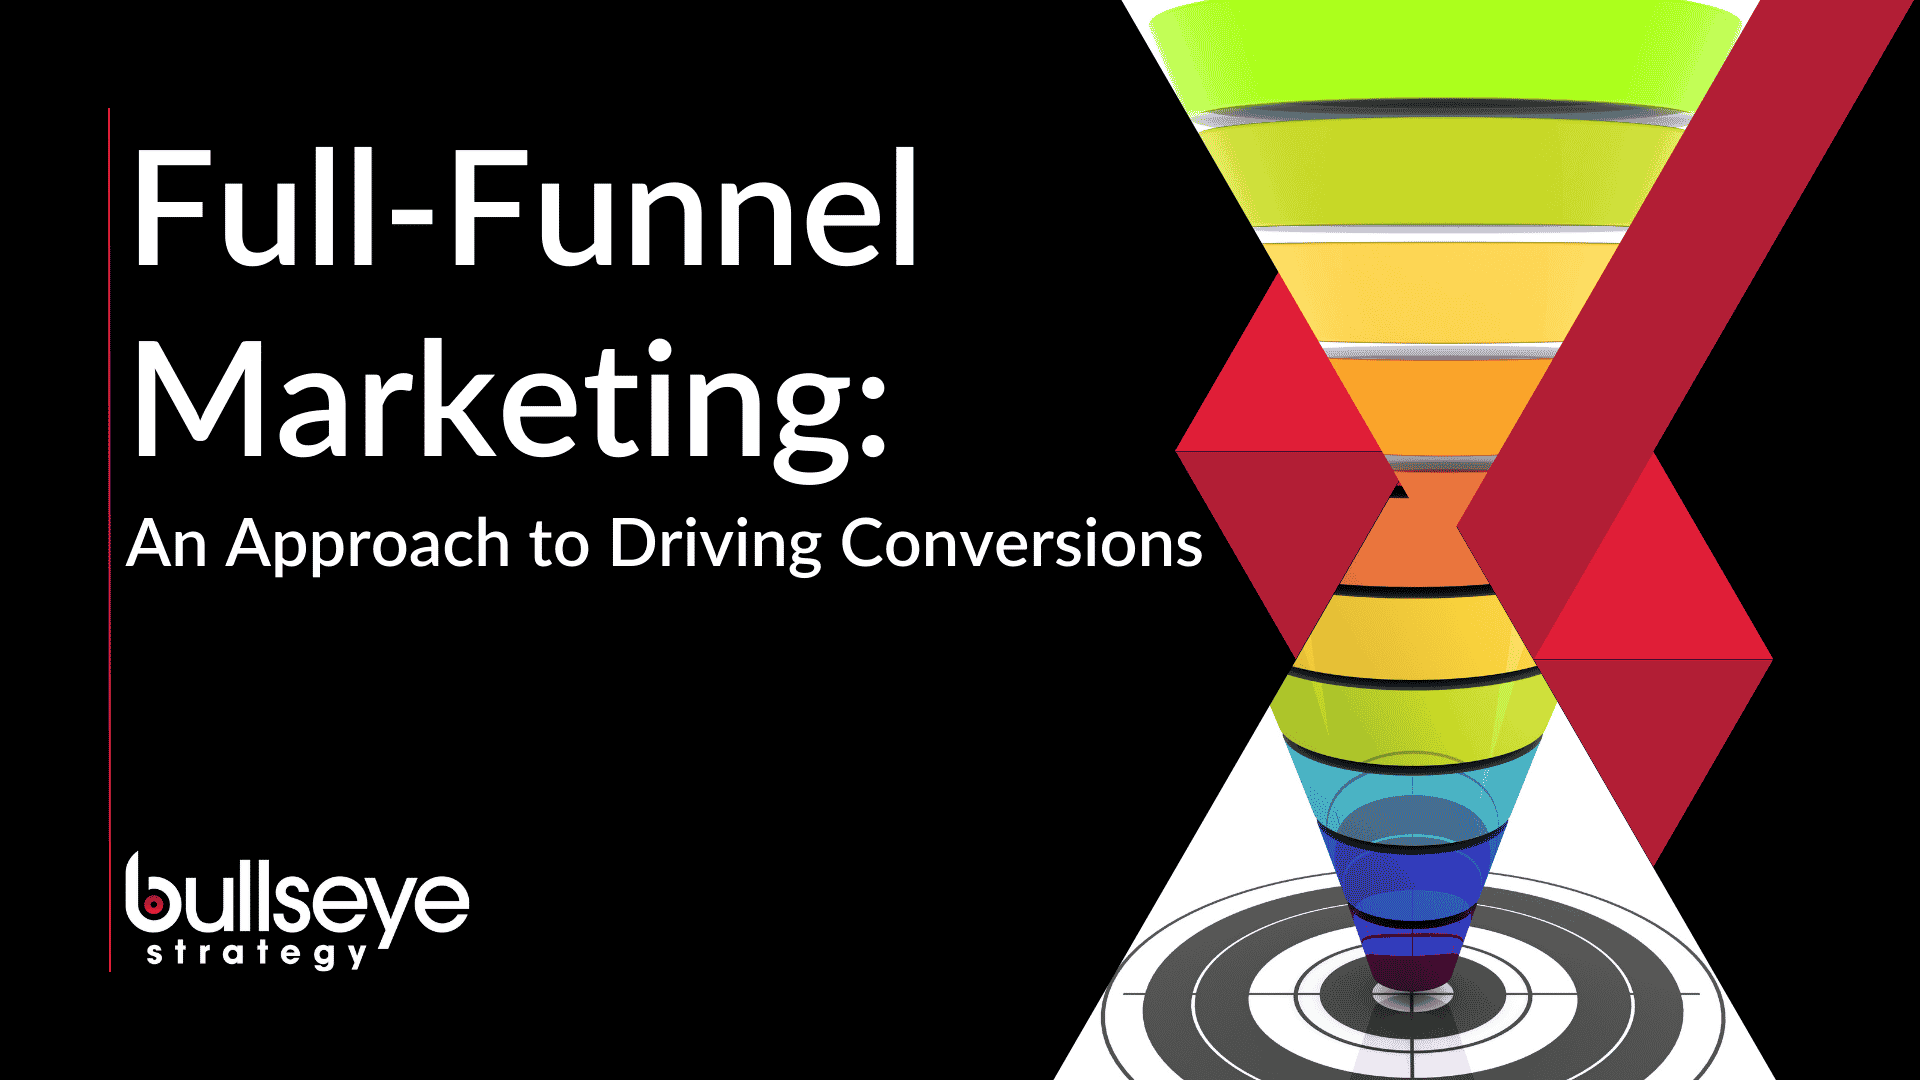 The marketing funnel is essential to driving conversions